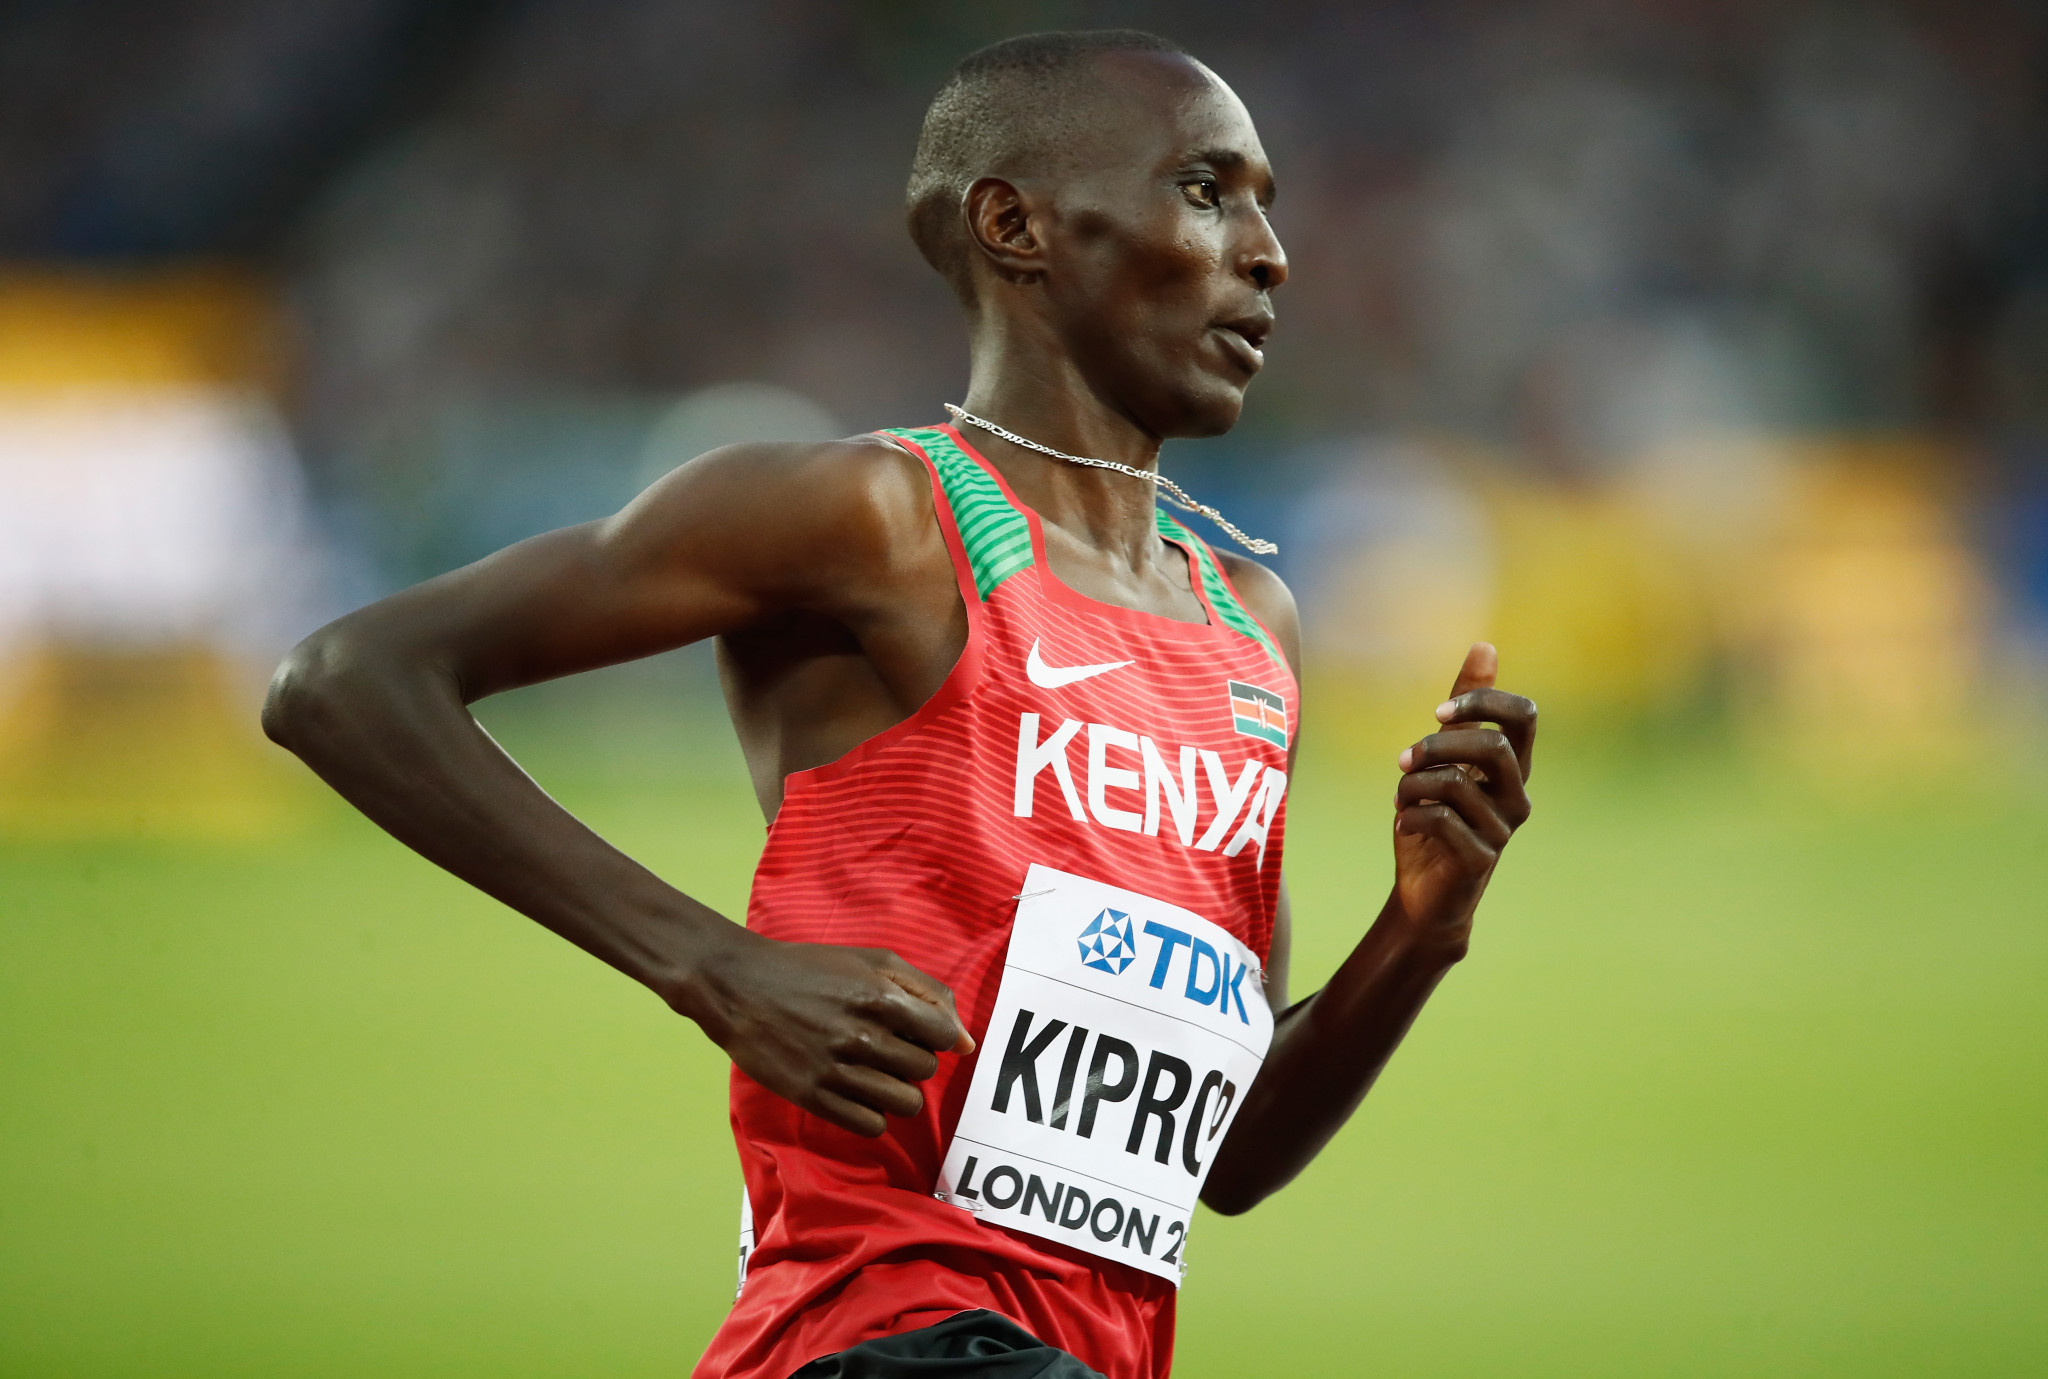 Asbel Kiprop has alleged extortion and denies taking performance enhancing drugs ©Getty Images